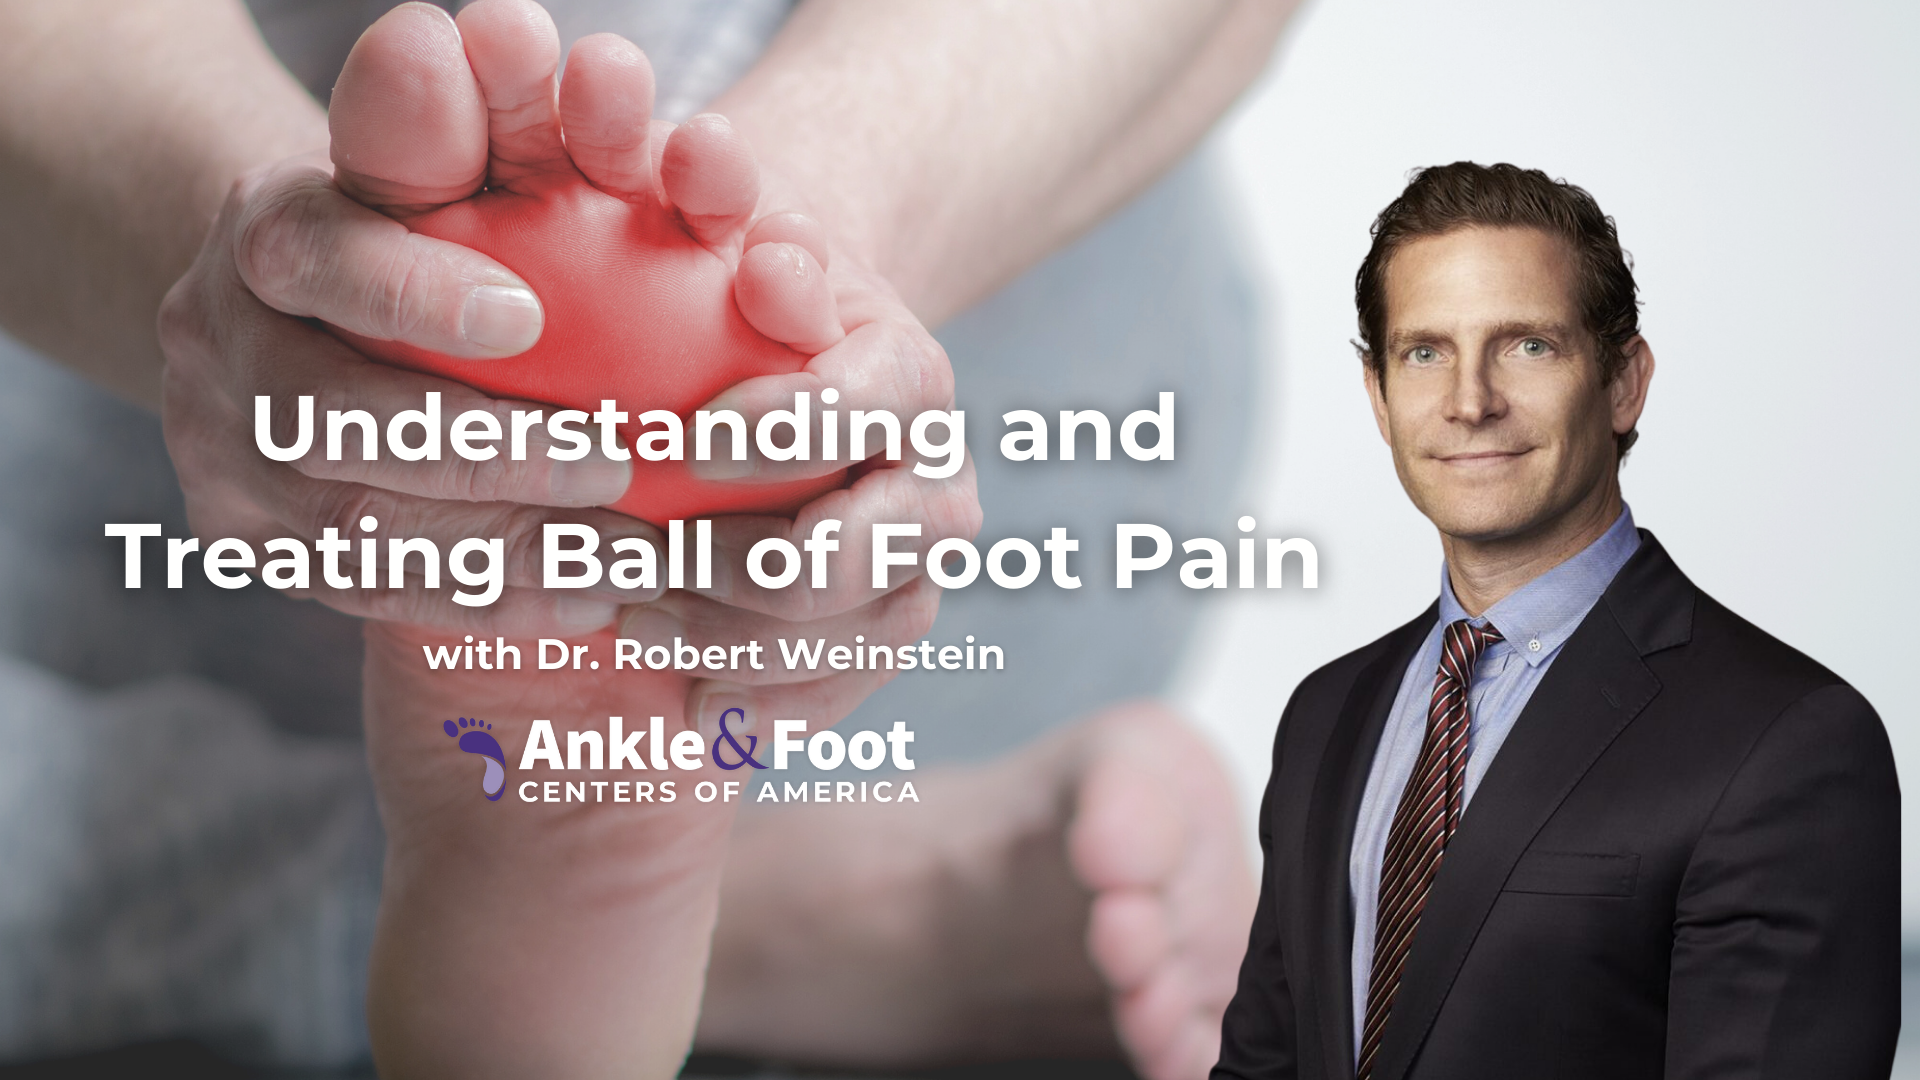 Ball of Foot Pain